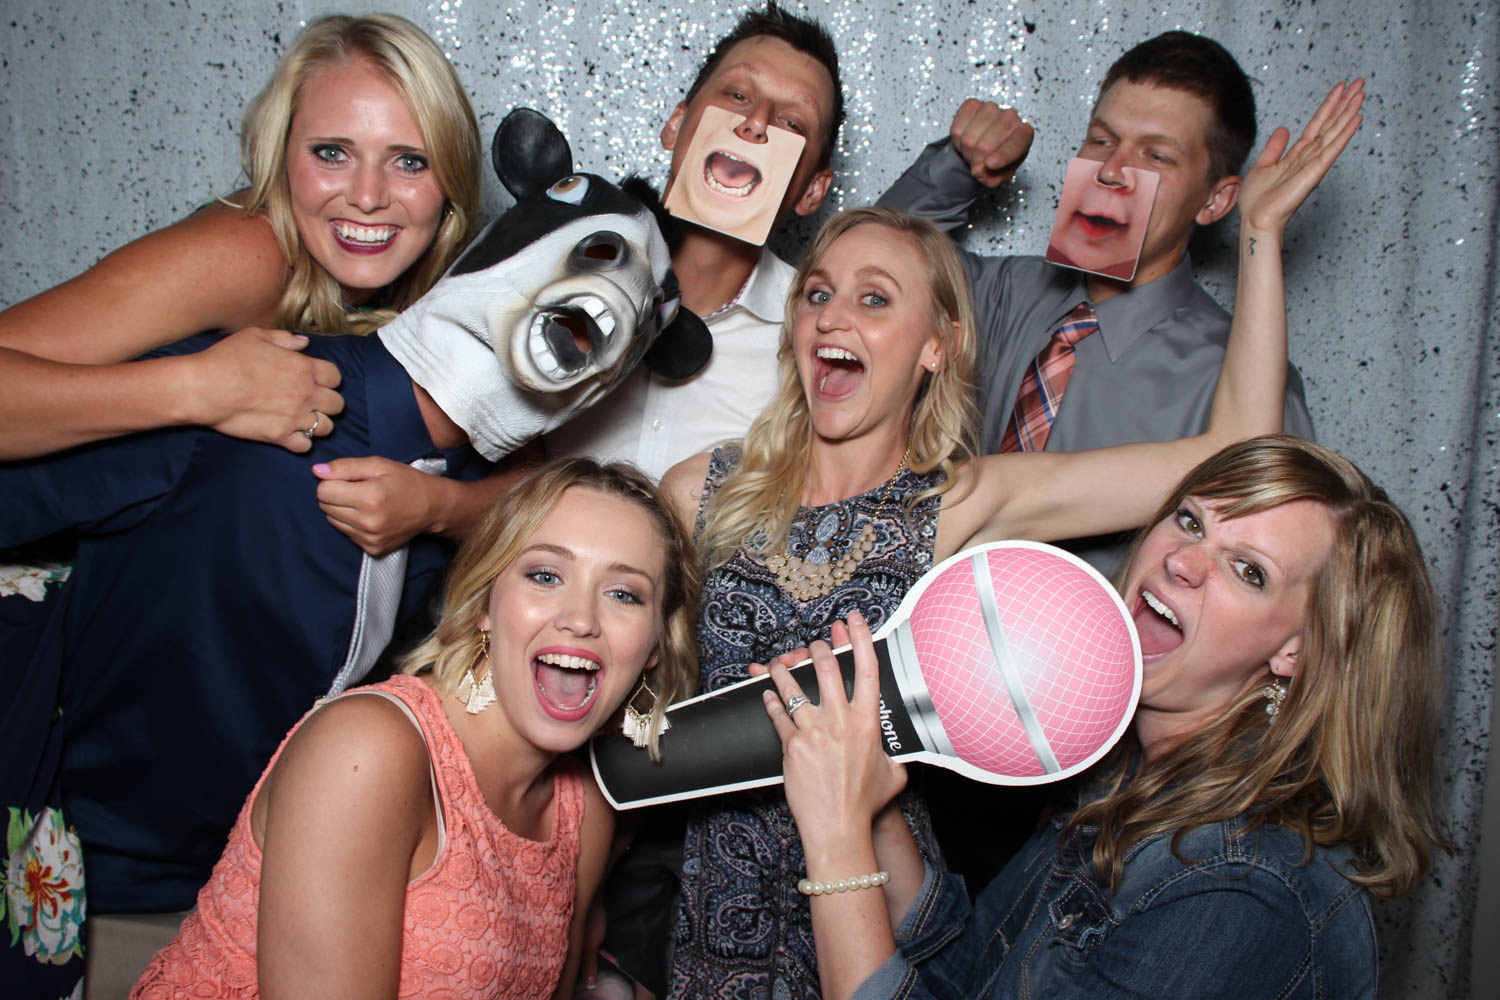 Bryan & Annalee's Wedding Photo Booth at the Park Ballroom in New ...